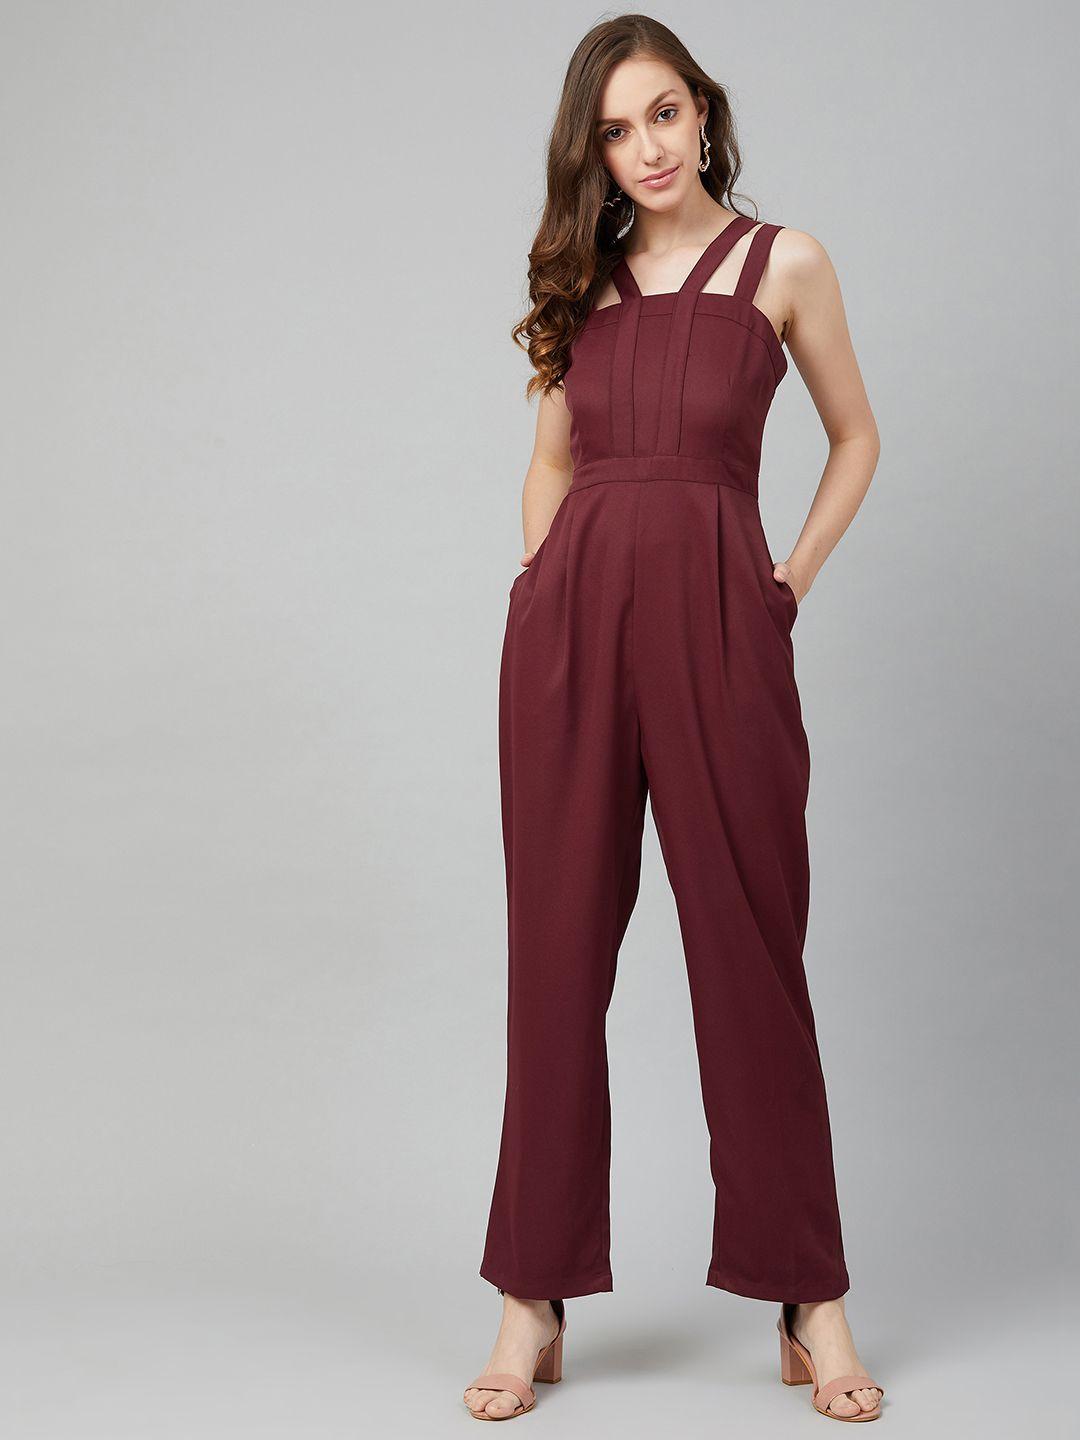 marie-claire-women-maroon-solid-basic-jumpsuit